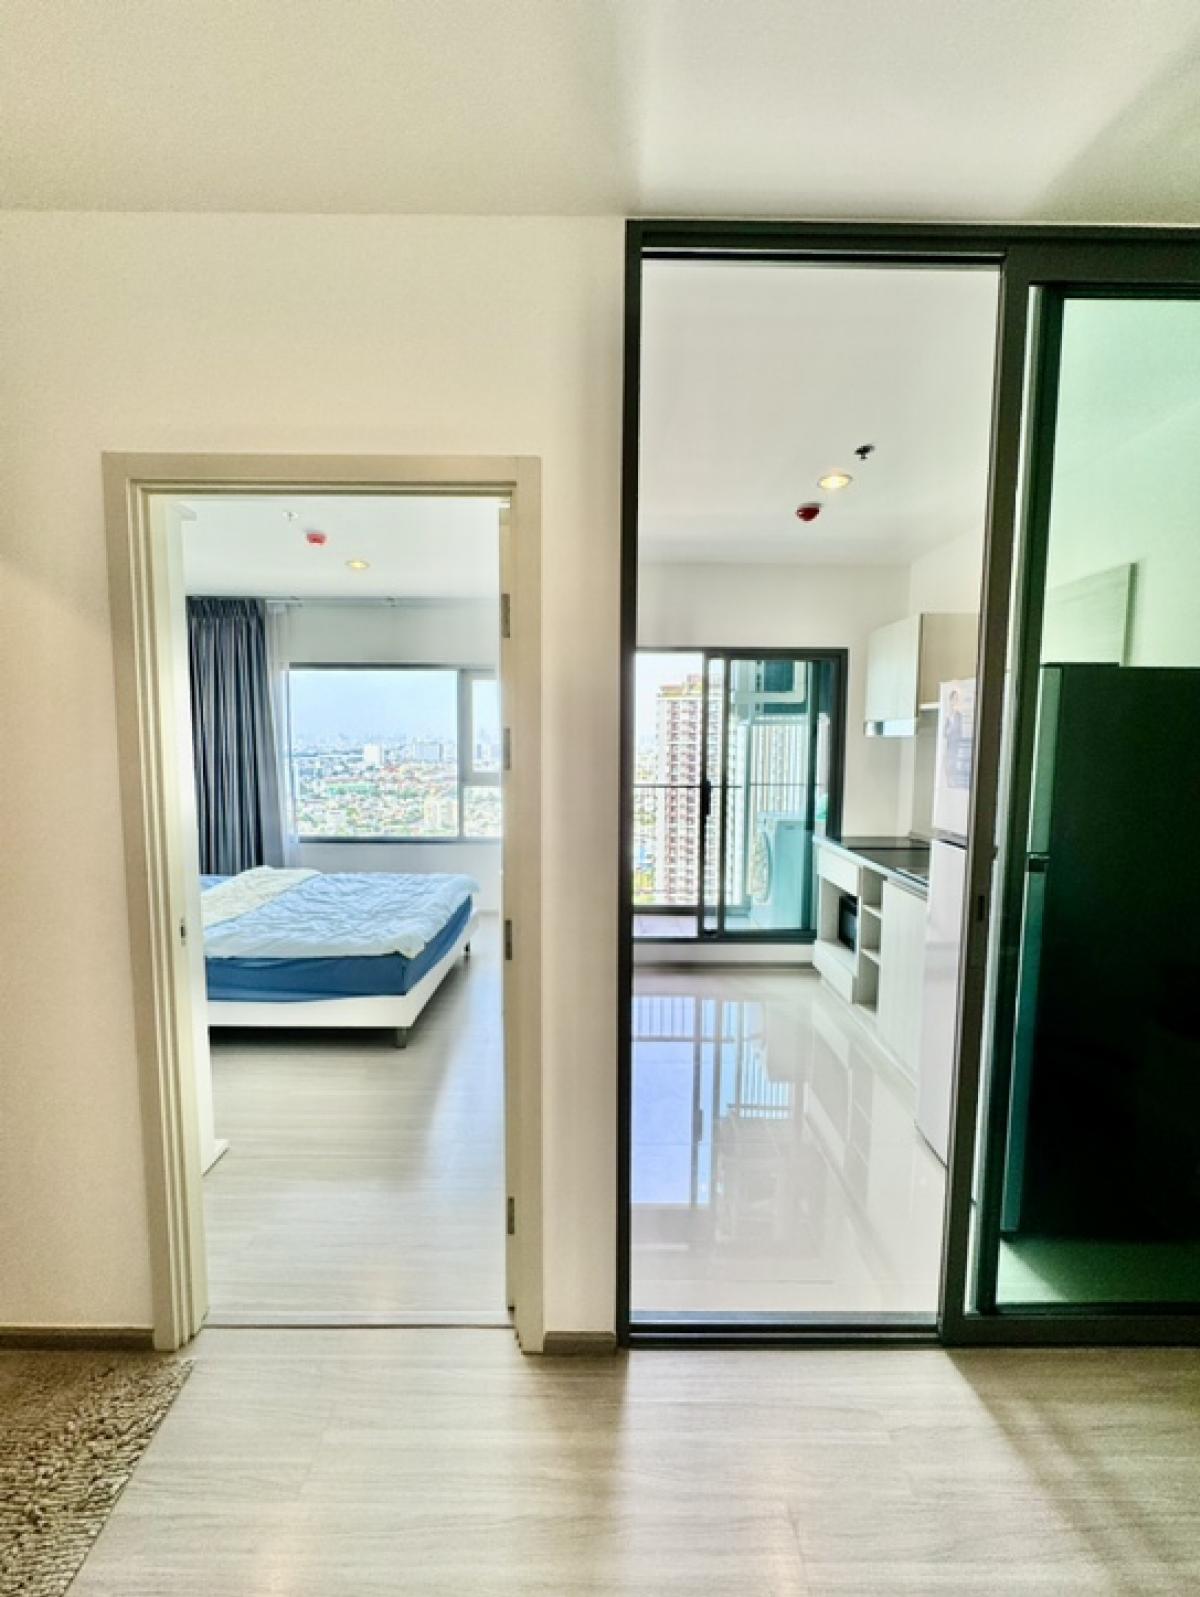 For SaleCondoThaphra, Talat Phlu, Wutthakat : Condo for sale, Aspire Sathorn-Ratchapruek, 31st floor, top floor, beautiful view, good view angle, not blocked by Supalai Condo, view to the east.